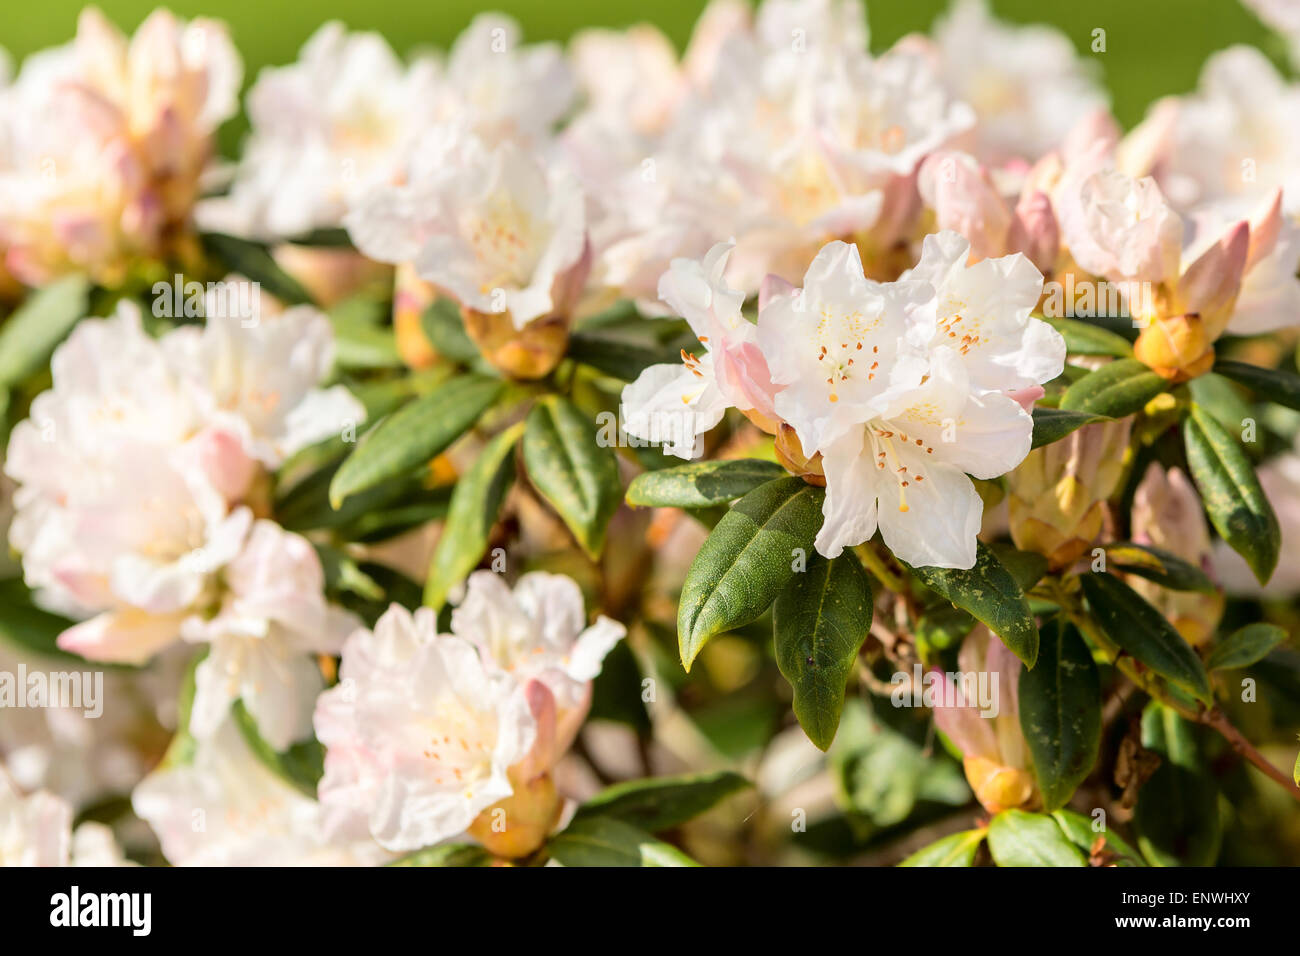 White Rhododendron bush in full bloom. Shallow dof, focus on flowers to the right. Stock Photo